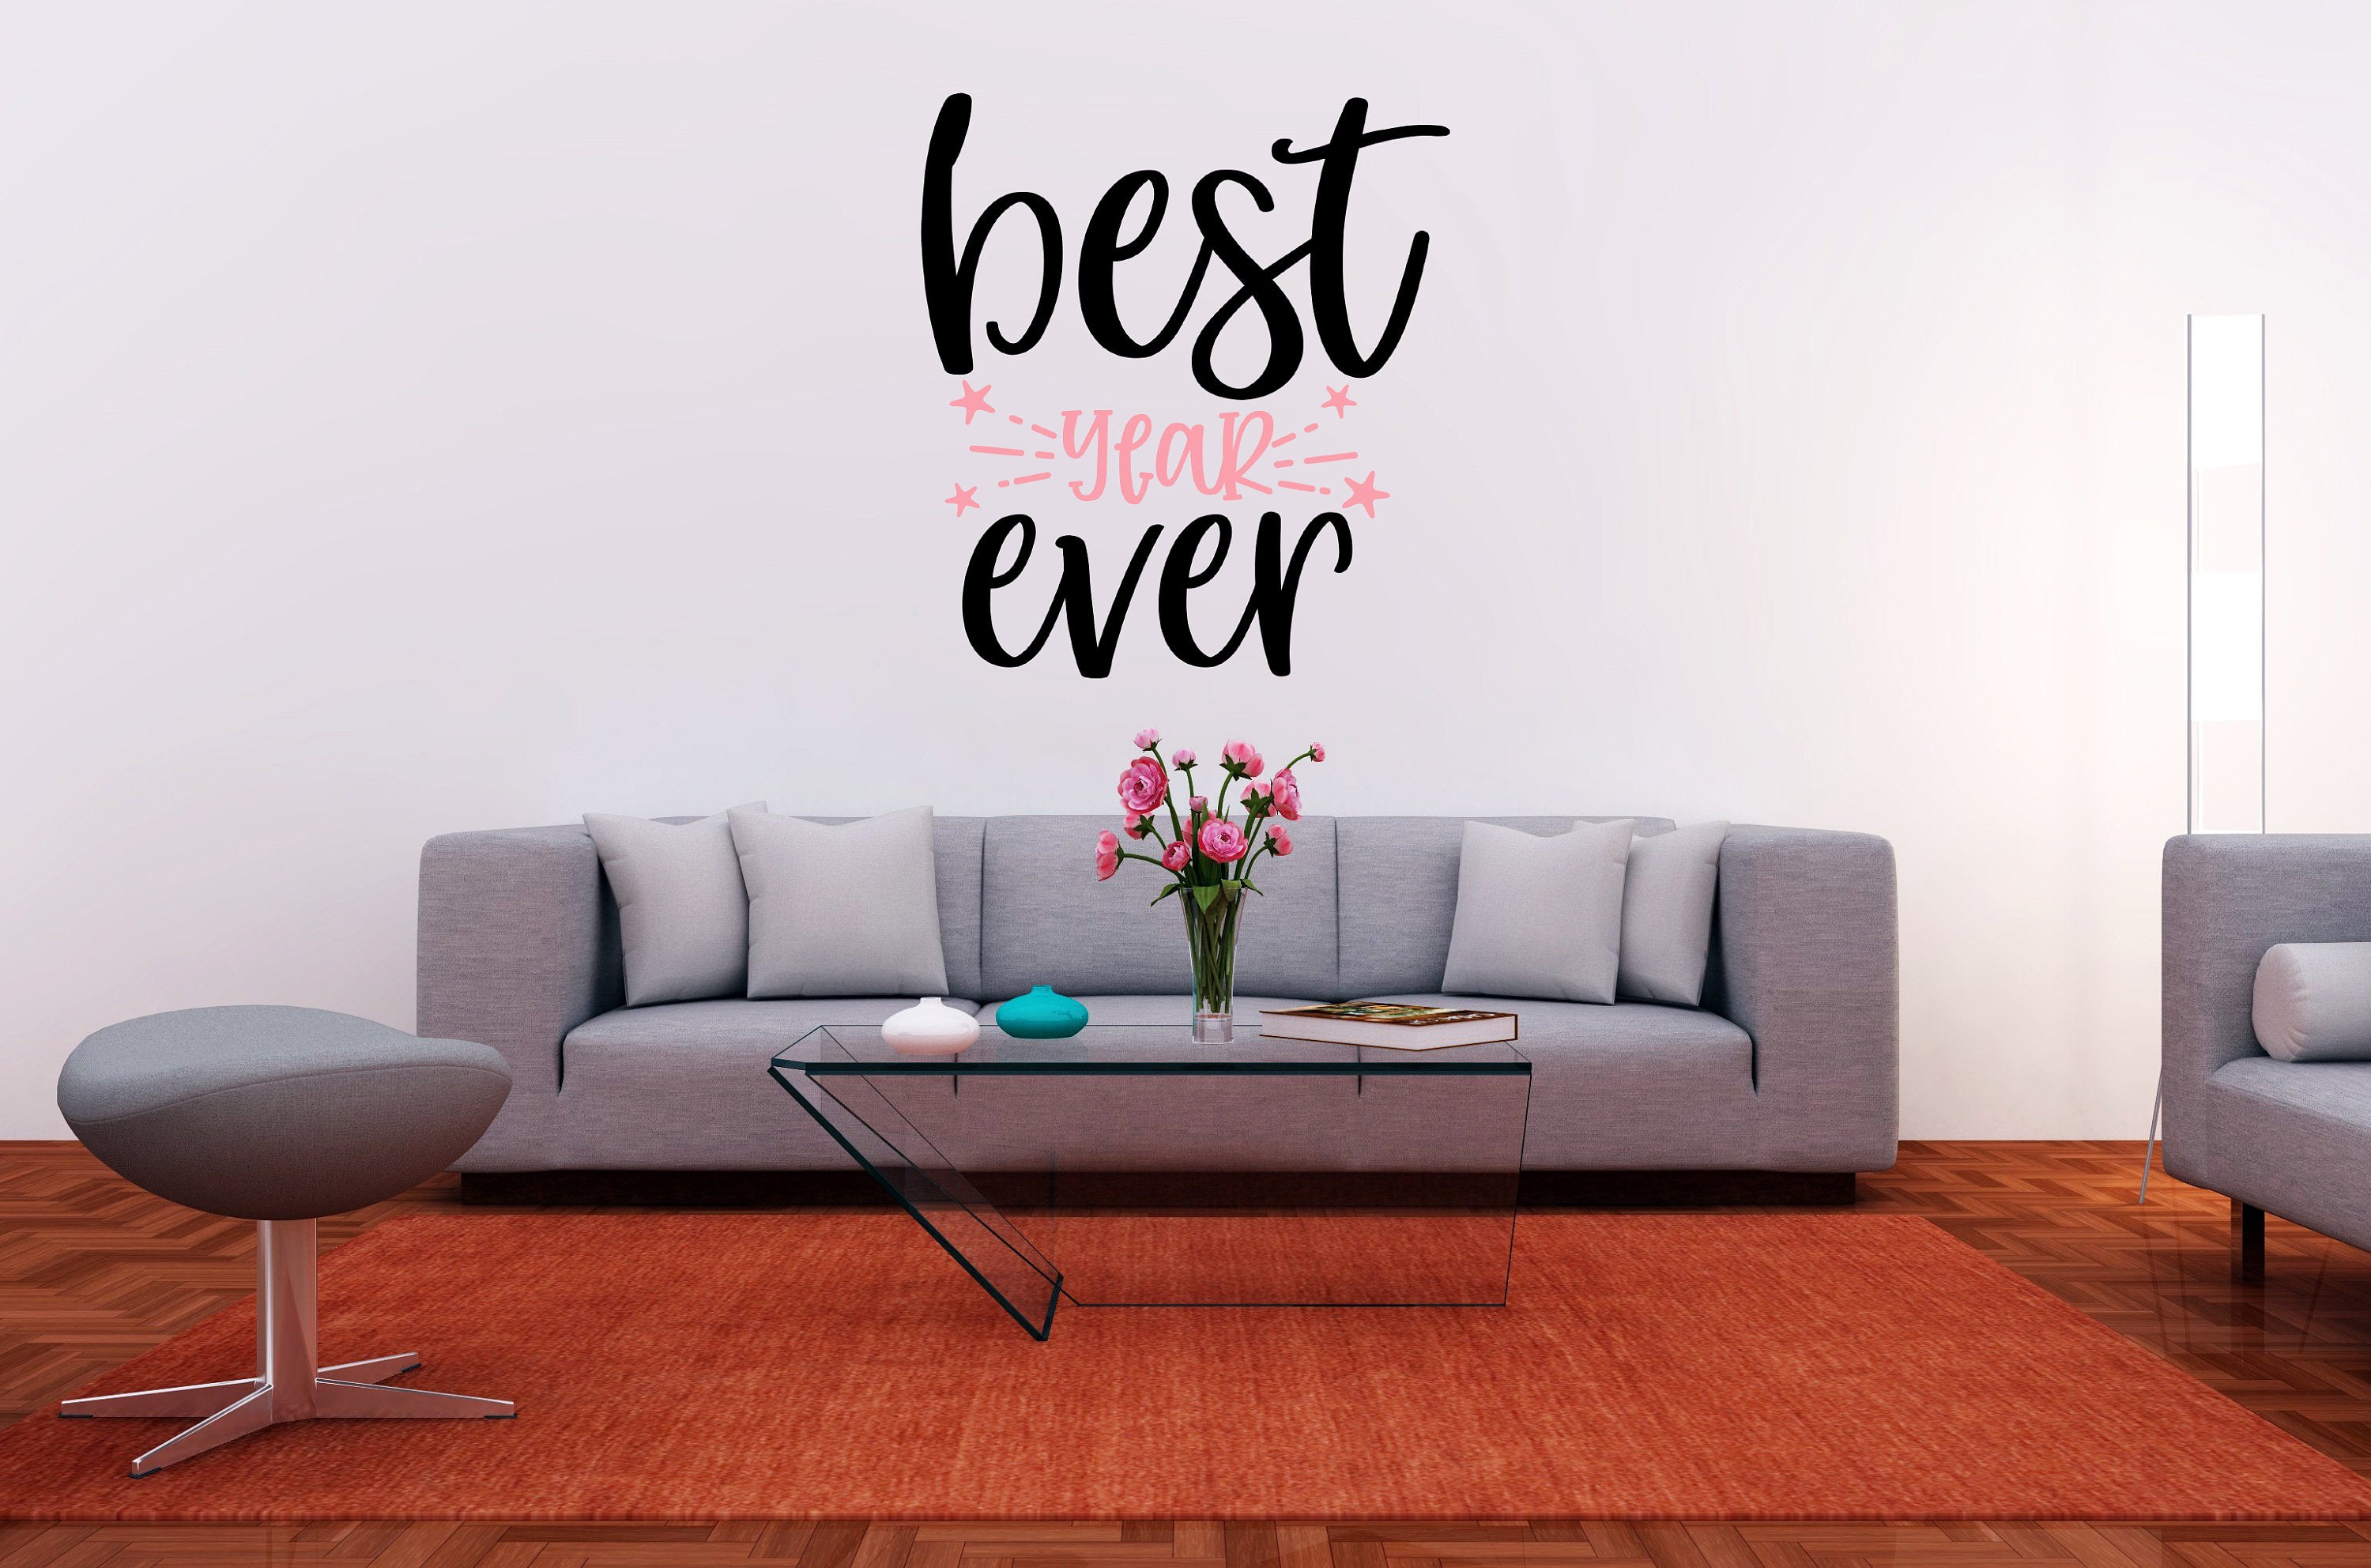 Best Year Ever Vinyl Decal for DIY Signs, Cars, Laptop, Tumblers, Walls, Wood, Metal, Glass, Party Decor, Gift, Permanent Outdoor-Grade